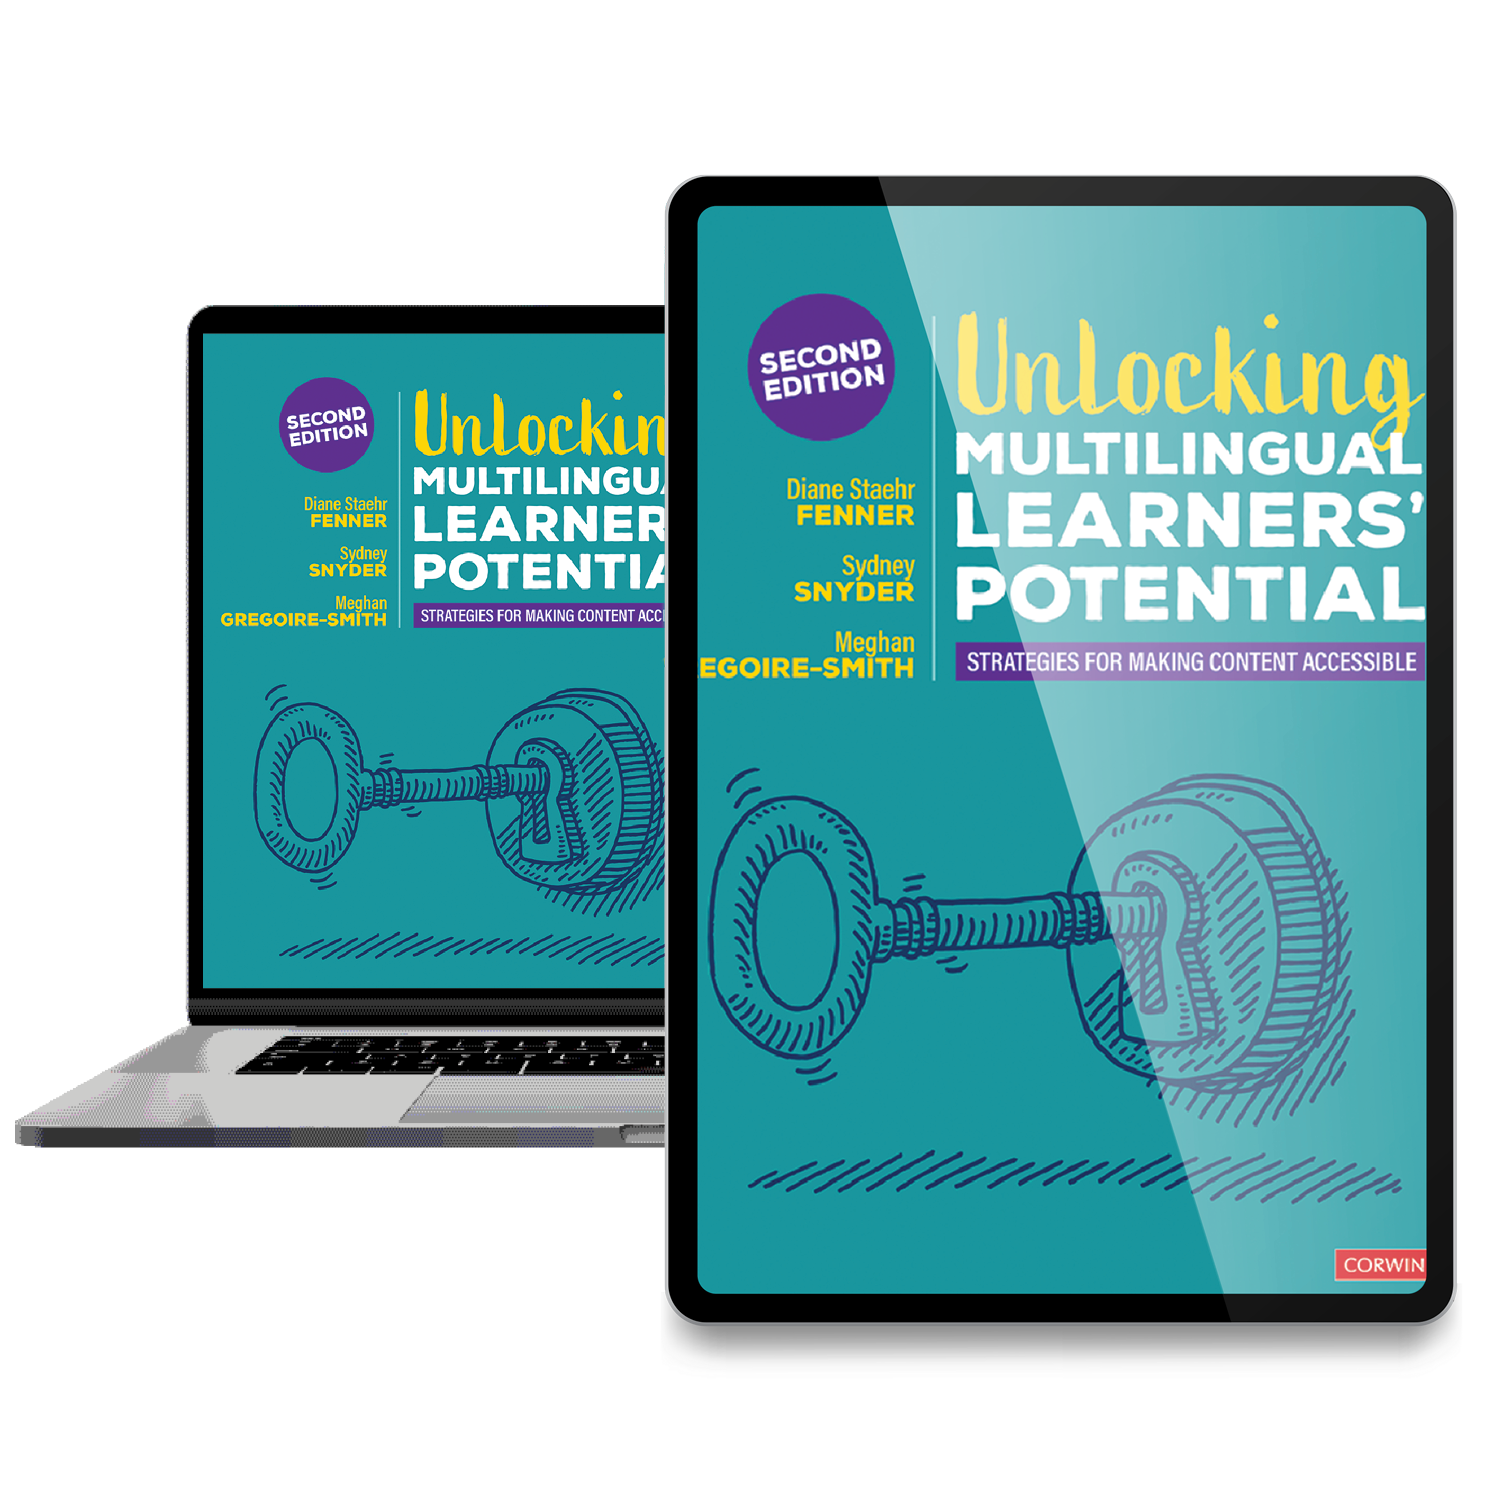 Unlocking English Learners' Potential Book Study